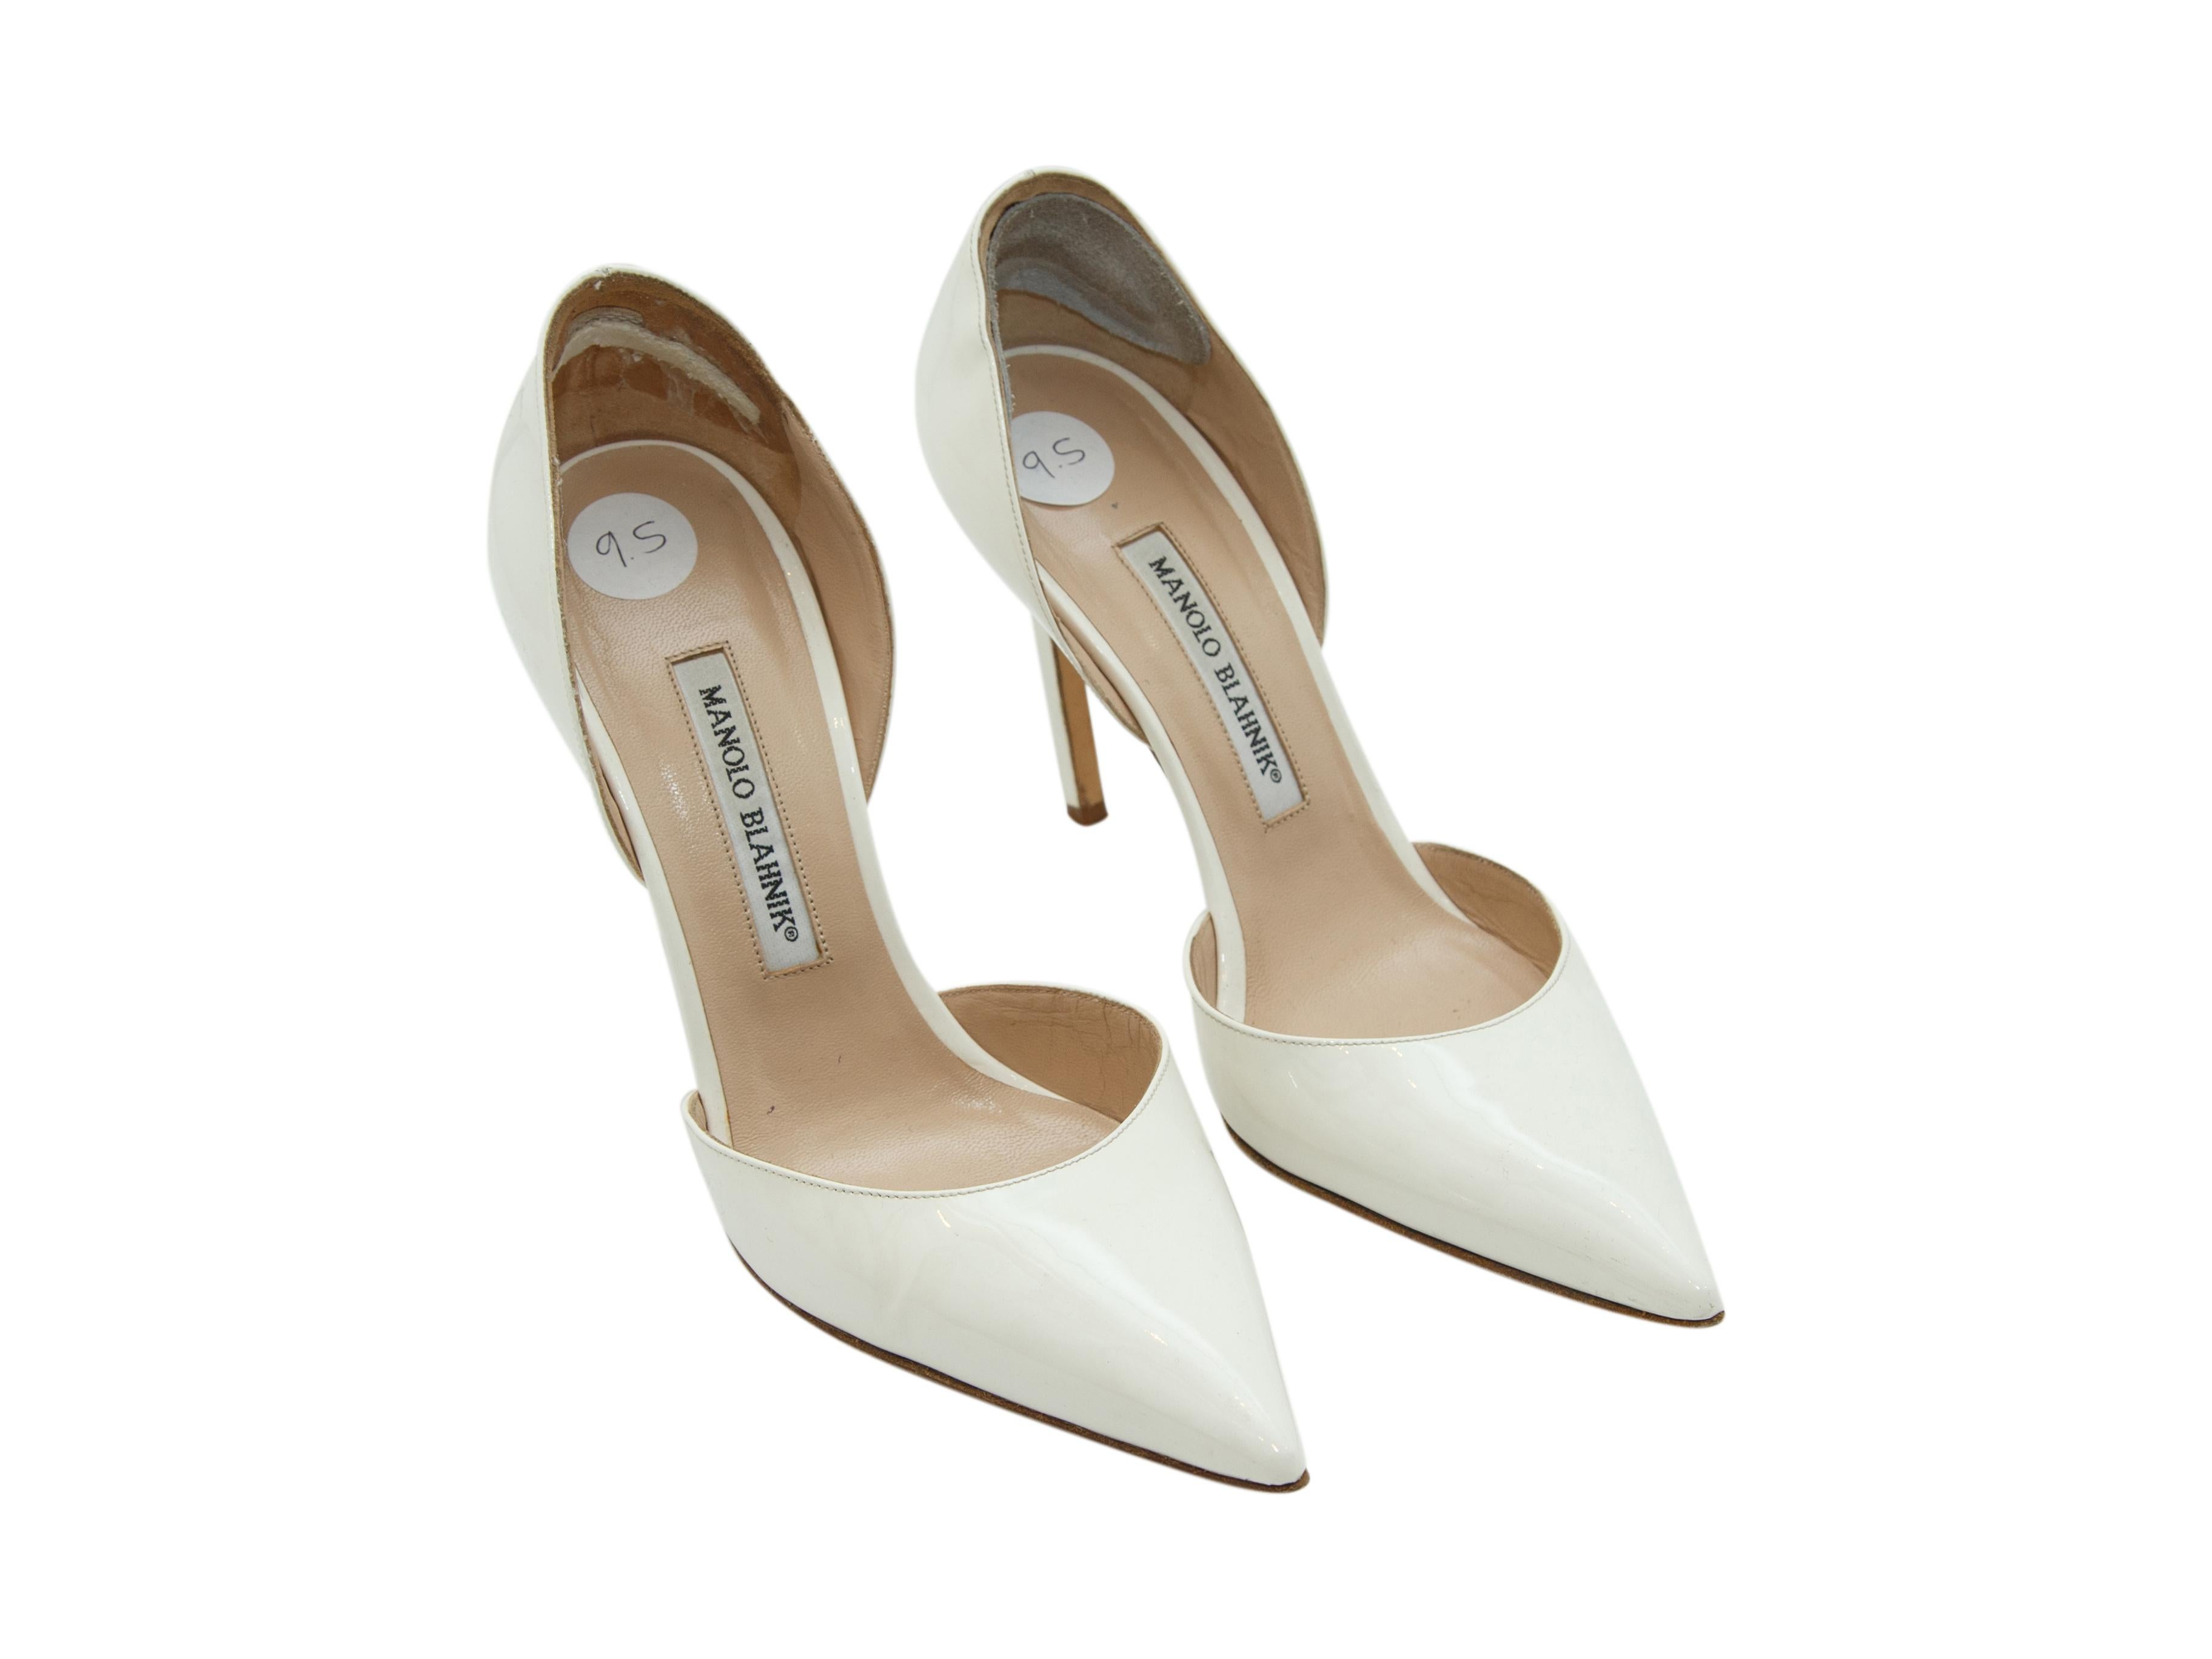 Product details:  White patent leather d'Orsay pumps by Manolo Blahnik.  Point toe.  Slip-on style.  
Condition: Pre-owned. Very good. 
Est. Retail $ 665.00